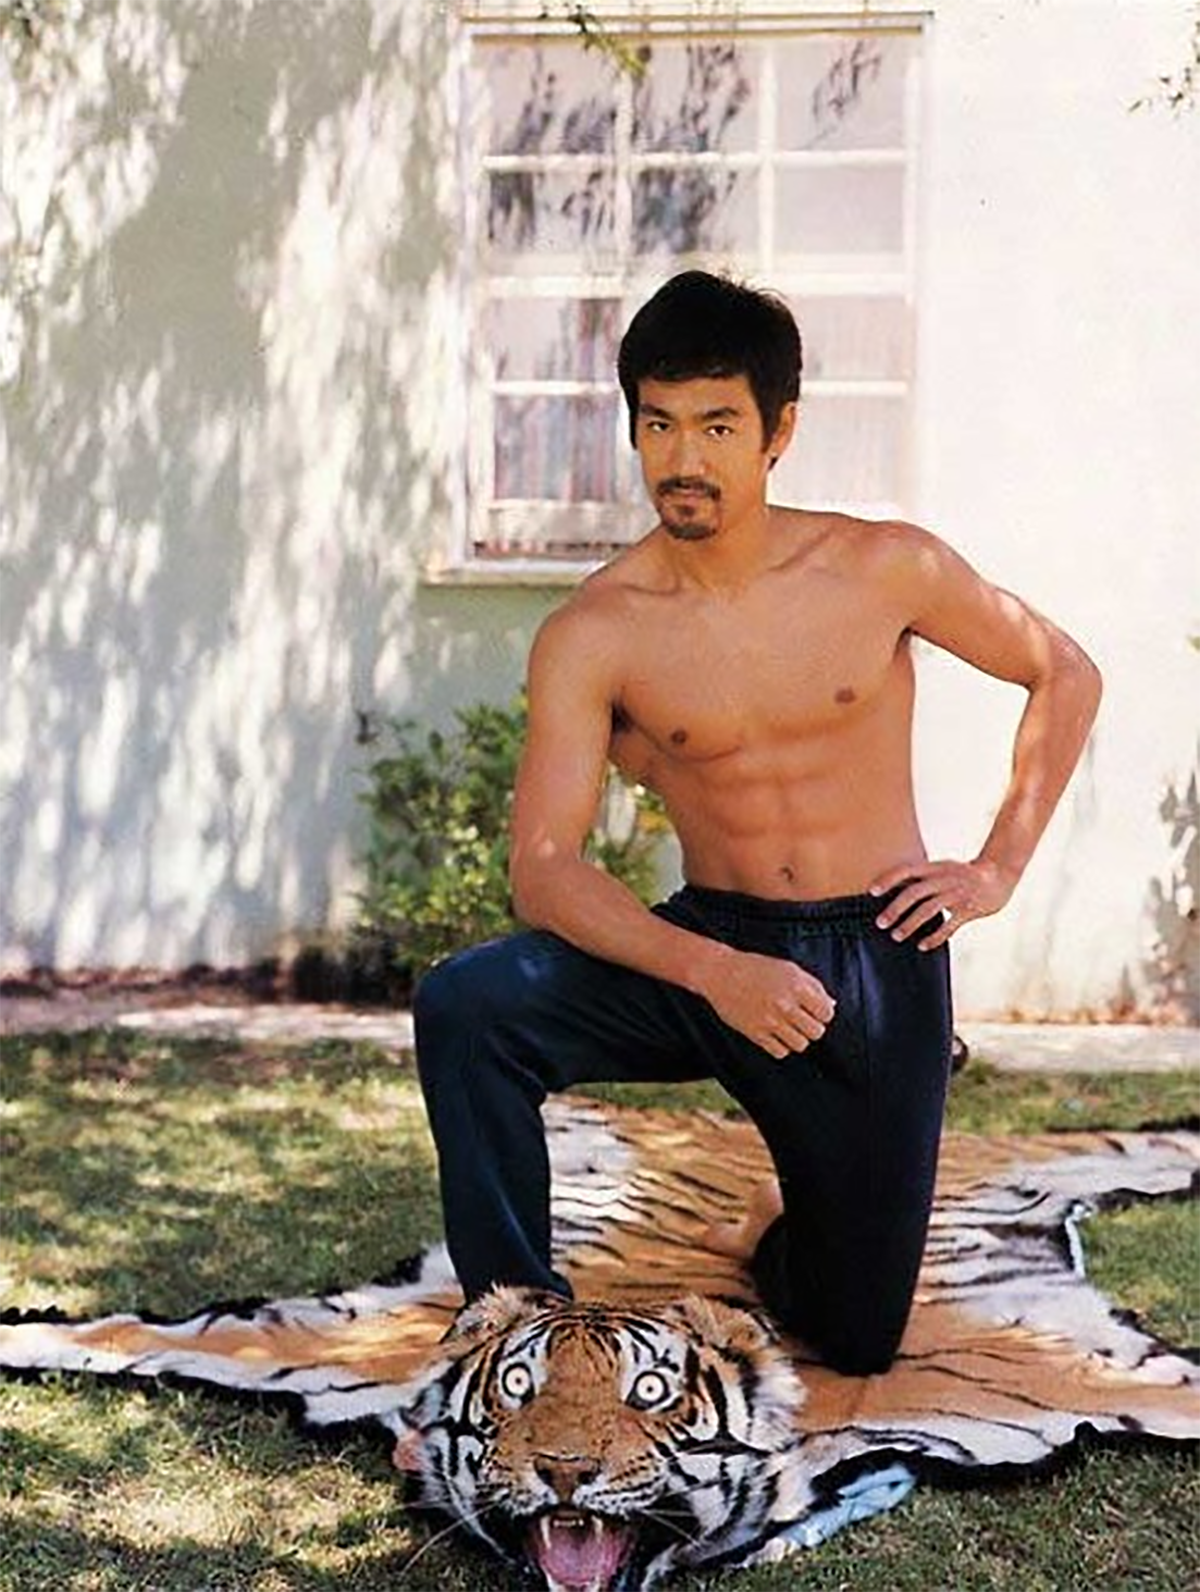 Bruce Lee posing on a tiger rug in front of his home for a magazine shoot in the early 1970s.